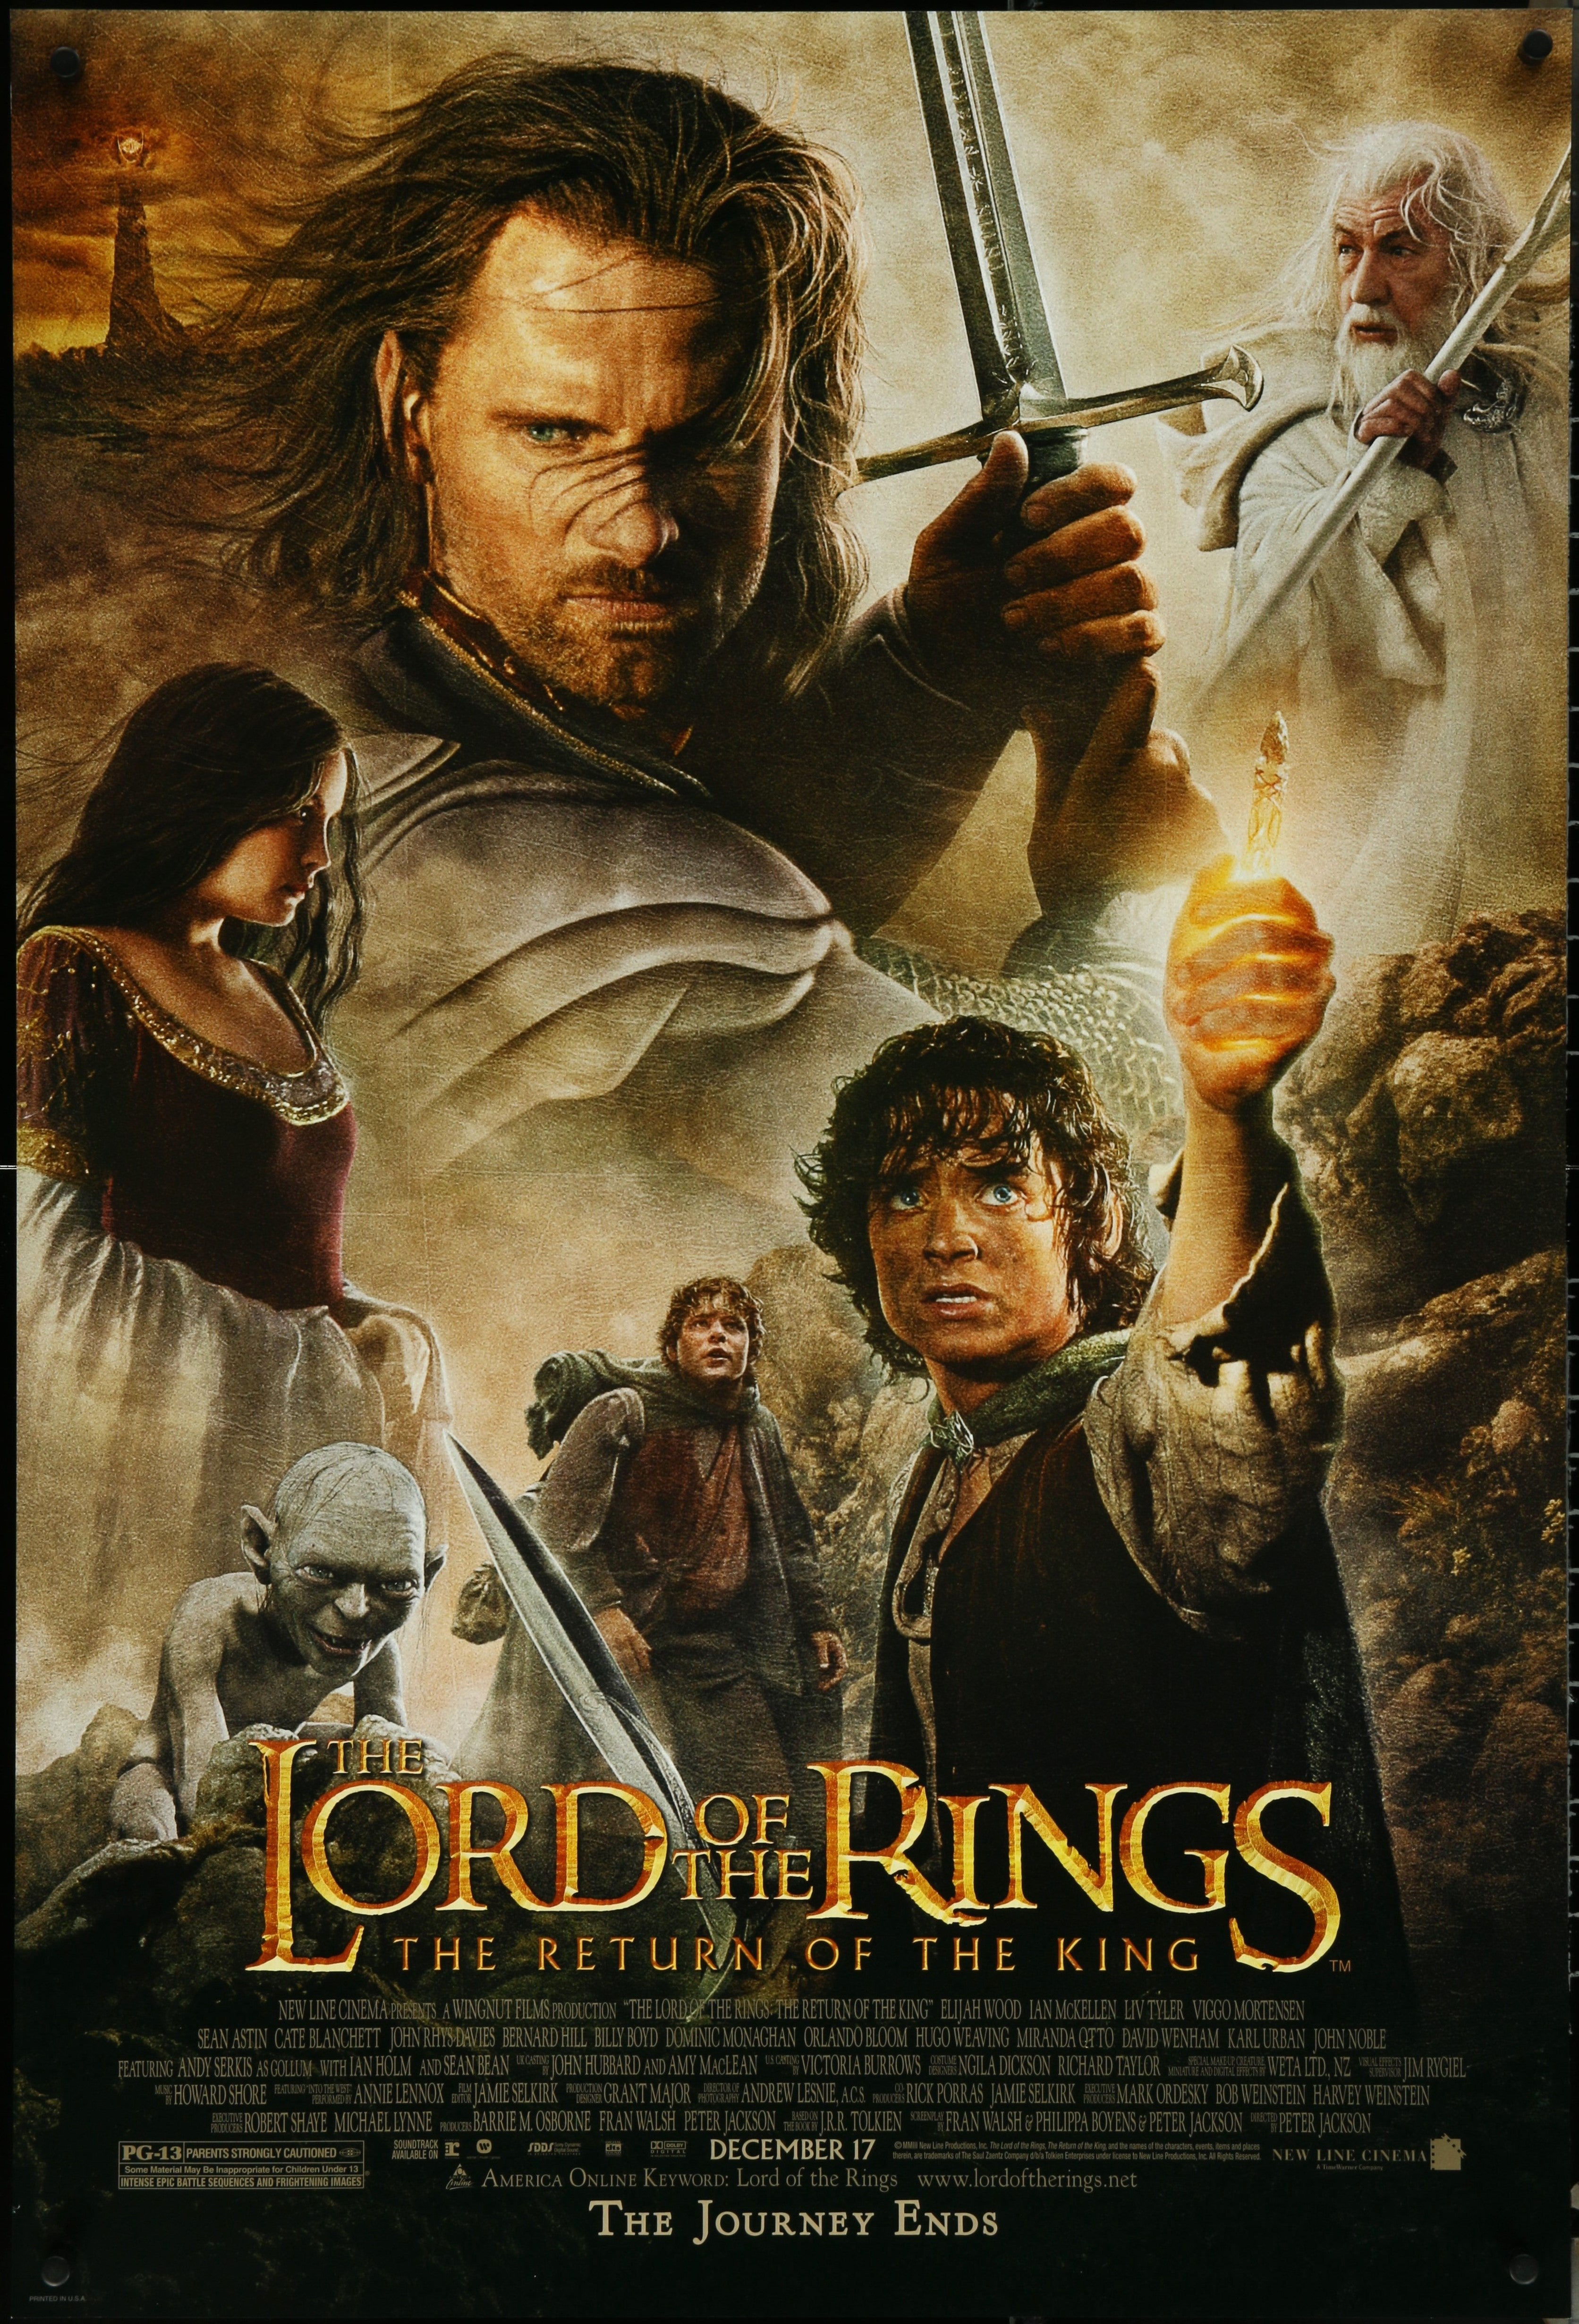 THE LORD OF THE RINGS: THE RETURN OF THE KING (2003)